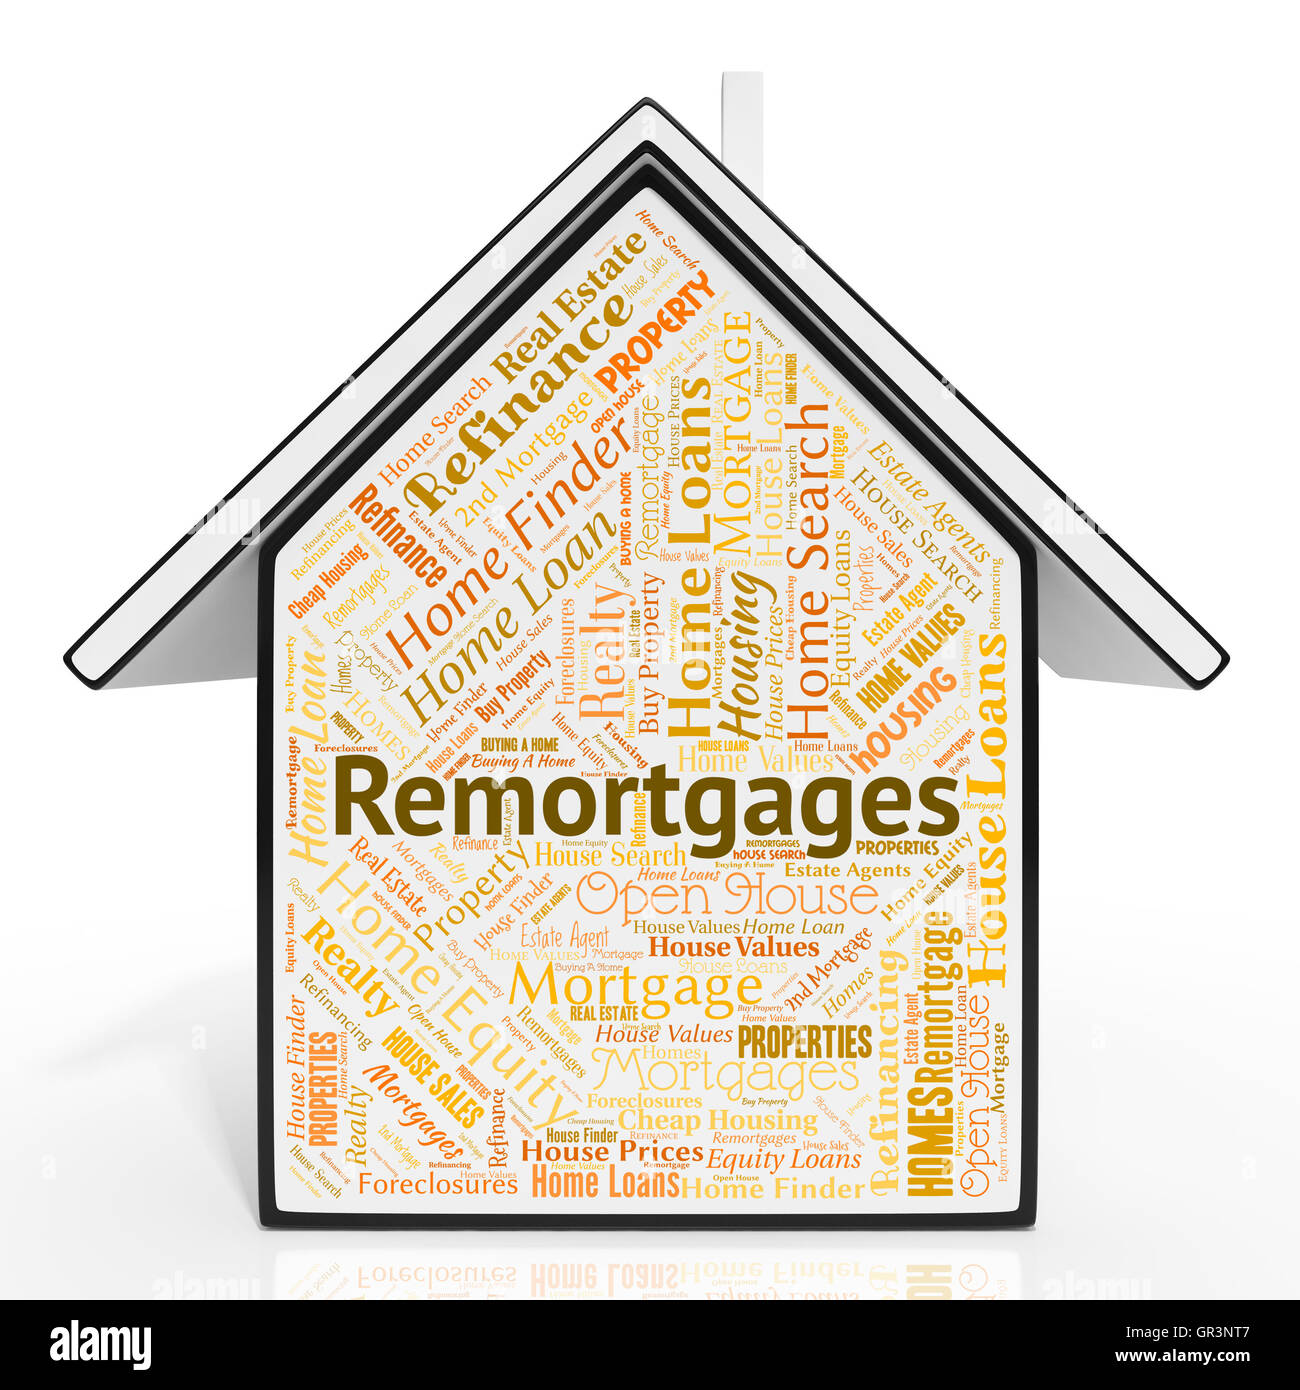 Remortgages House Meaning Home Residence And Remortgaging Stock Photo